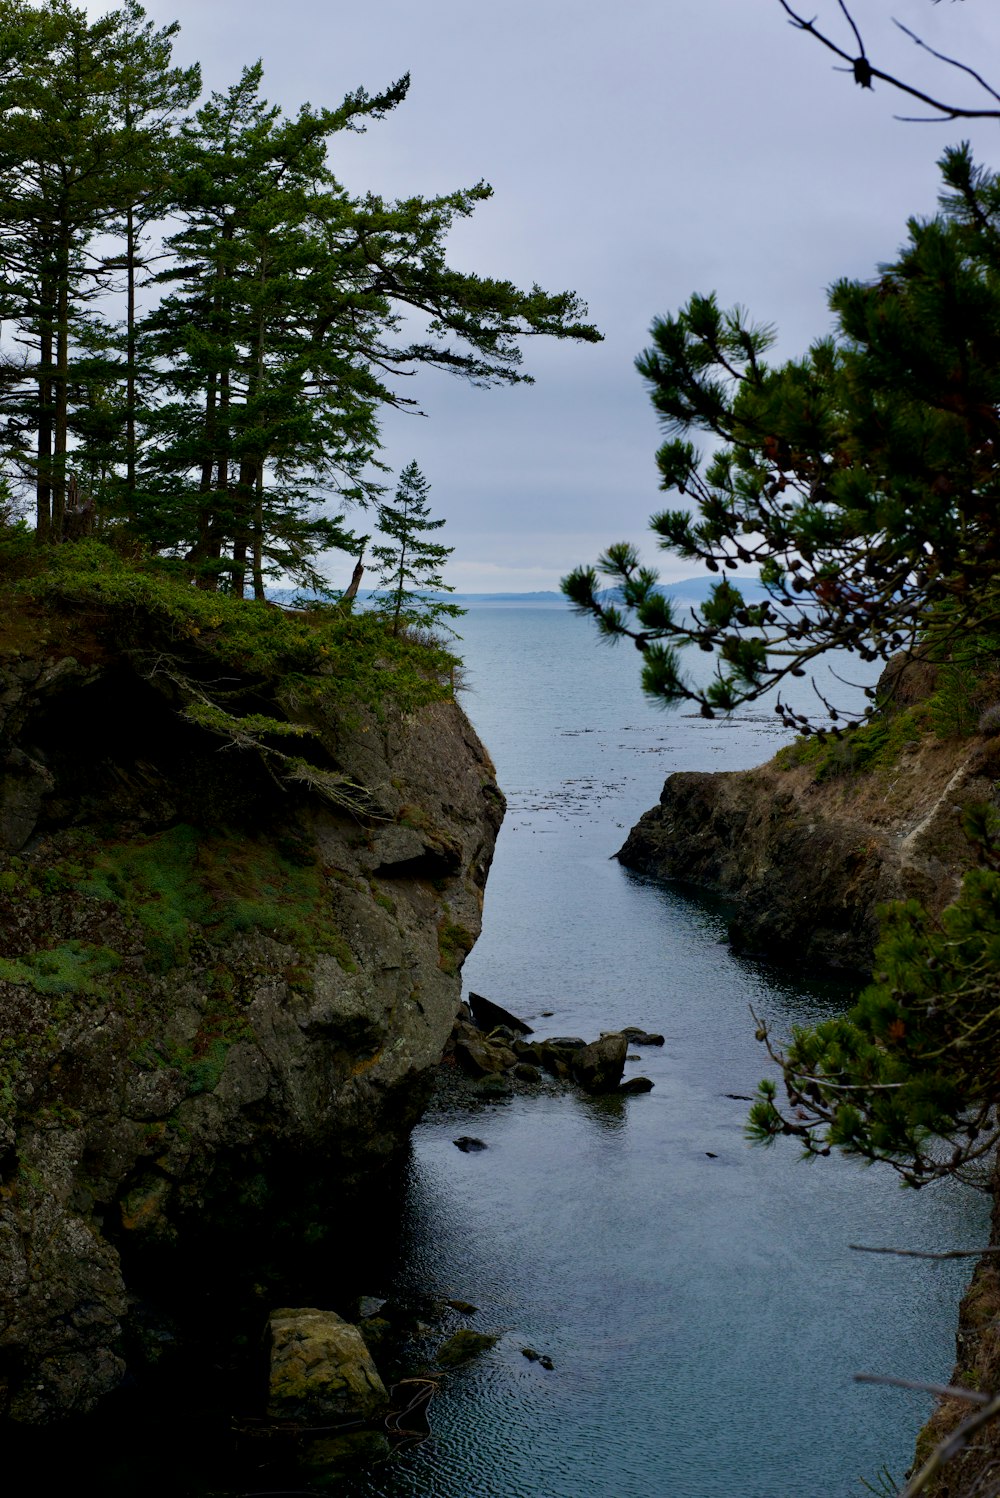 a body of water surrounded by trees and rocks